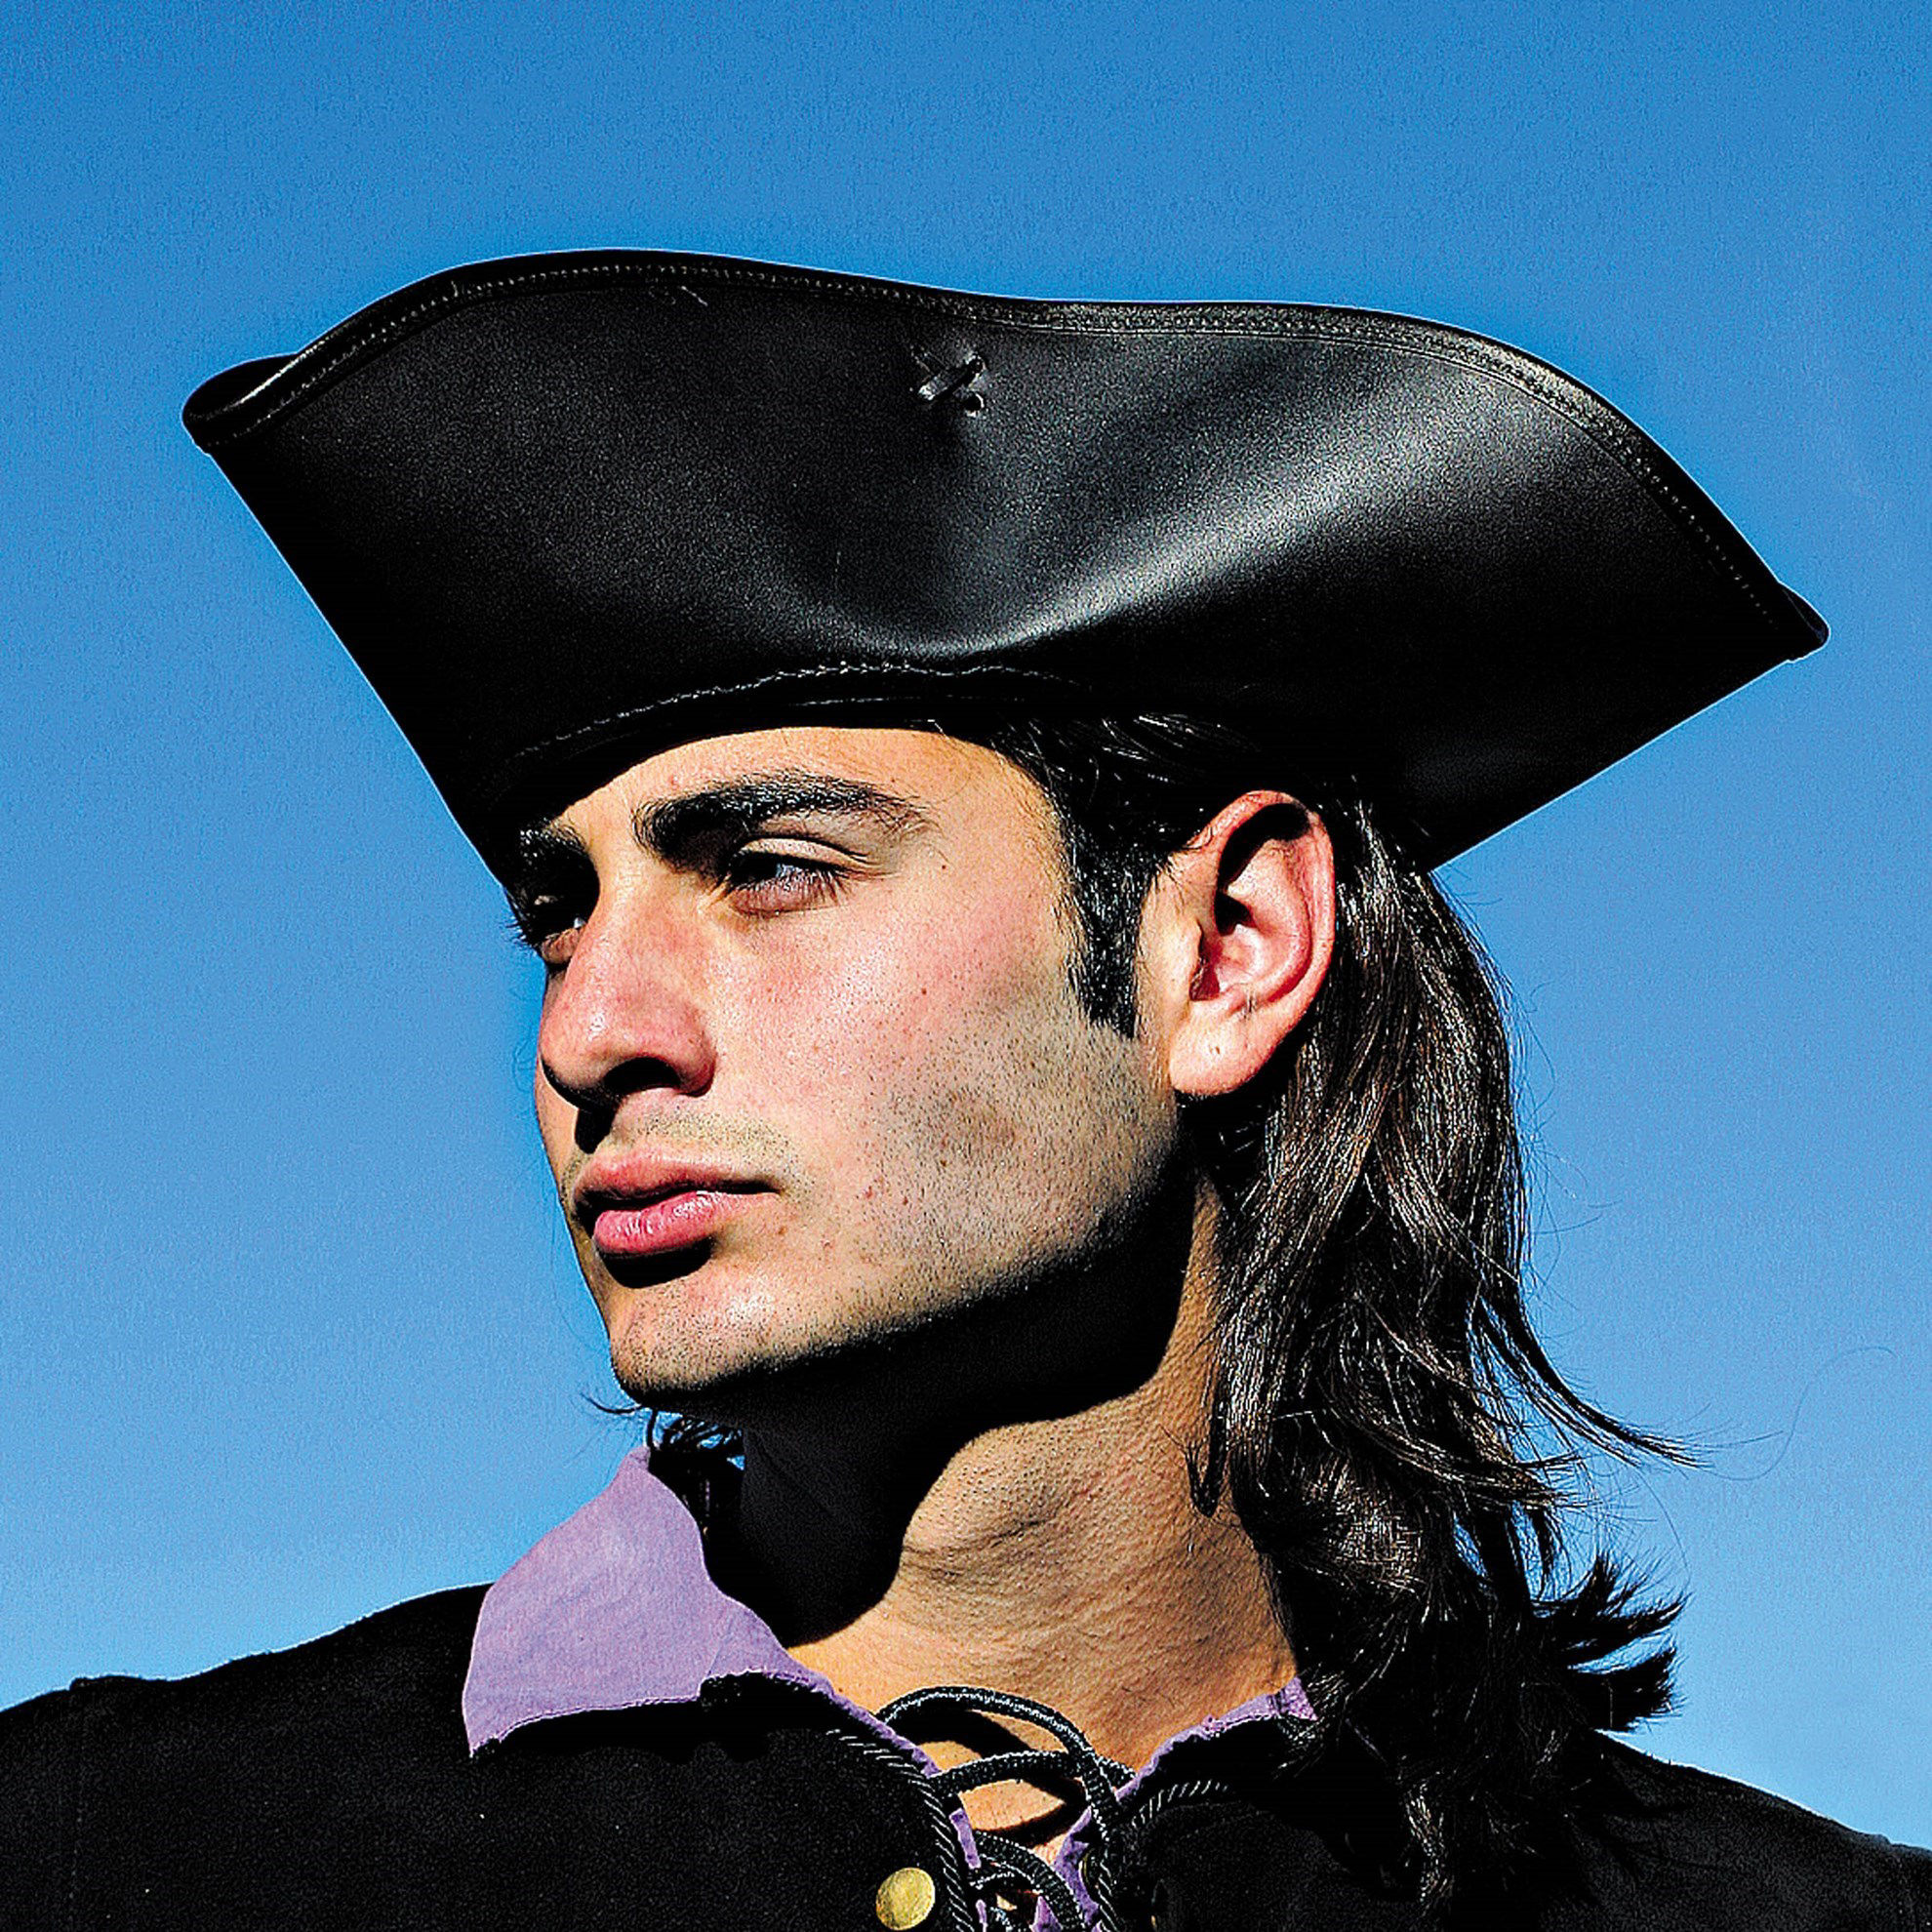 Capt. Jack Tricorn Pirate Hat is made of top grain leather with a weathered finish.